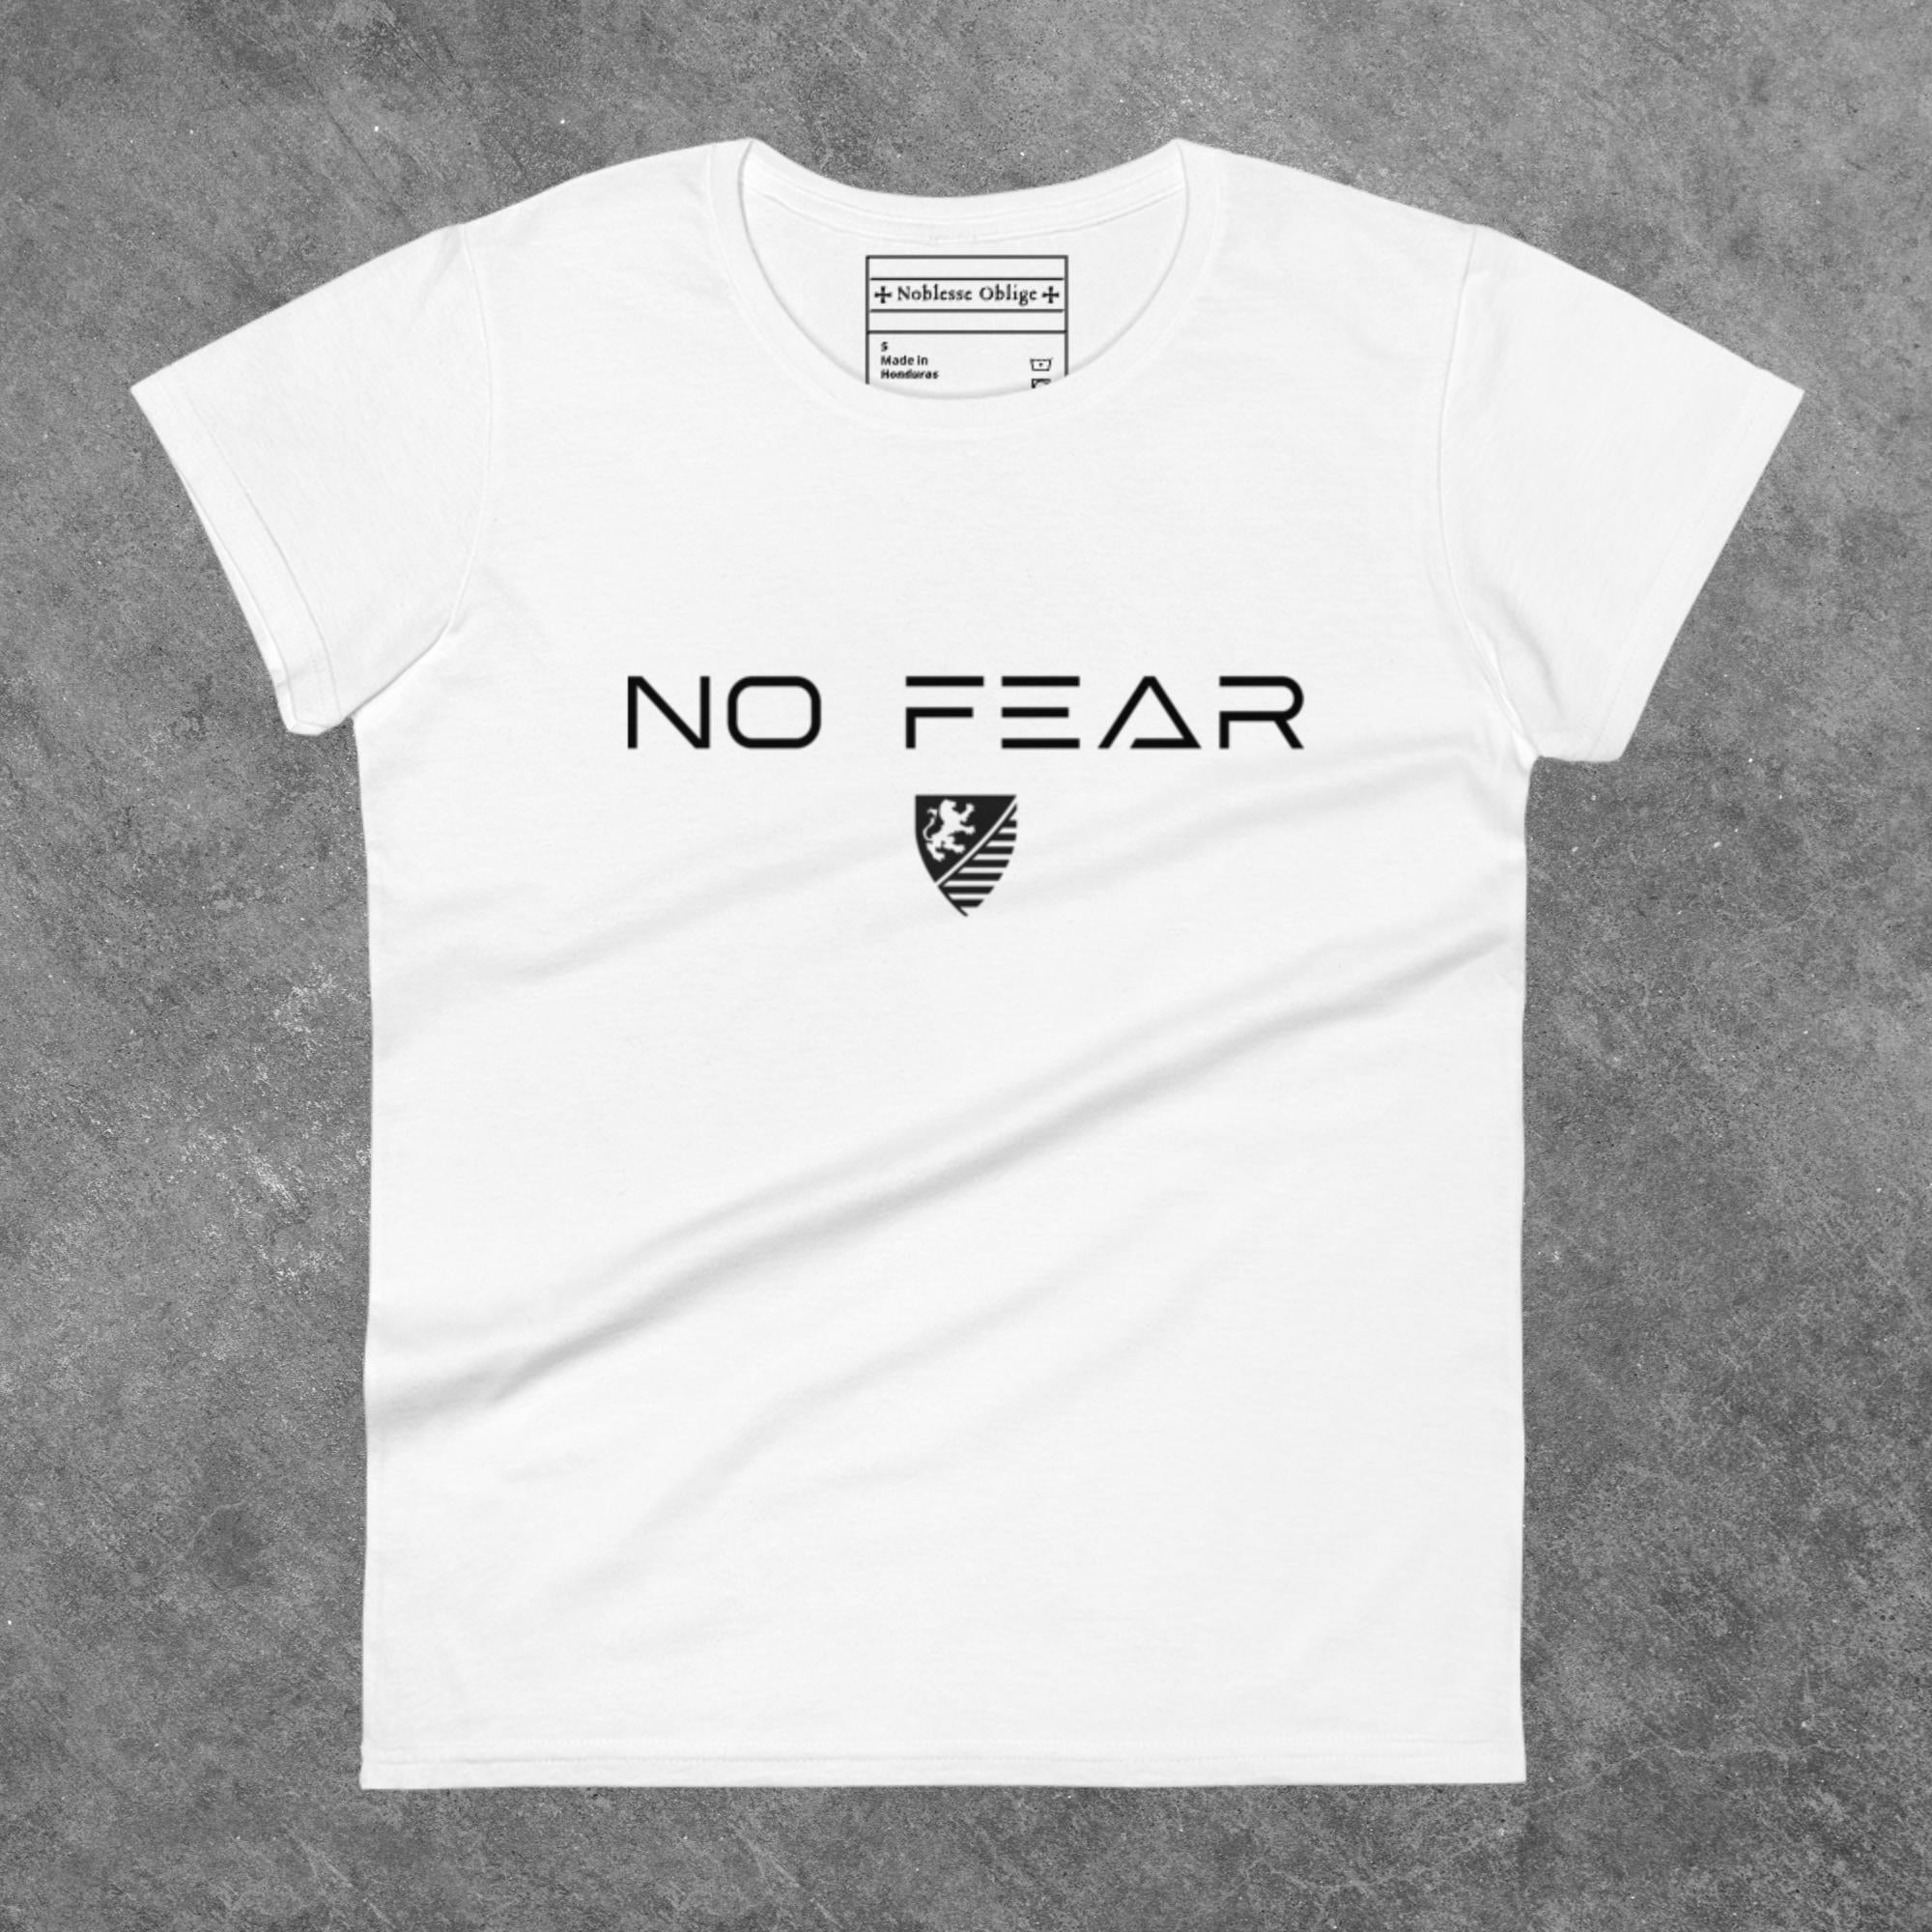 No Fear - Women's Fitted T-Shirt - Noblesse Oblige Apparel